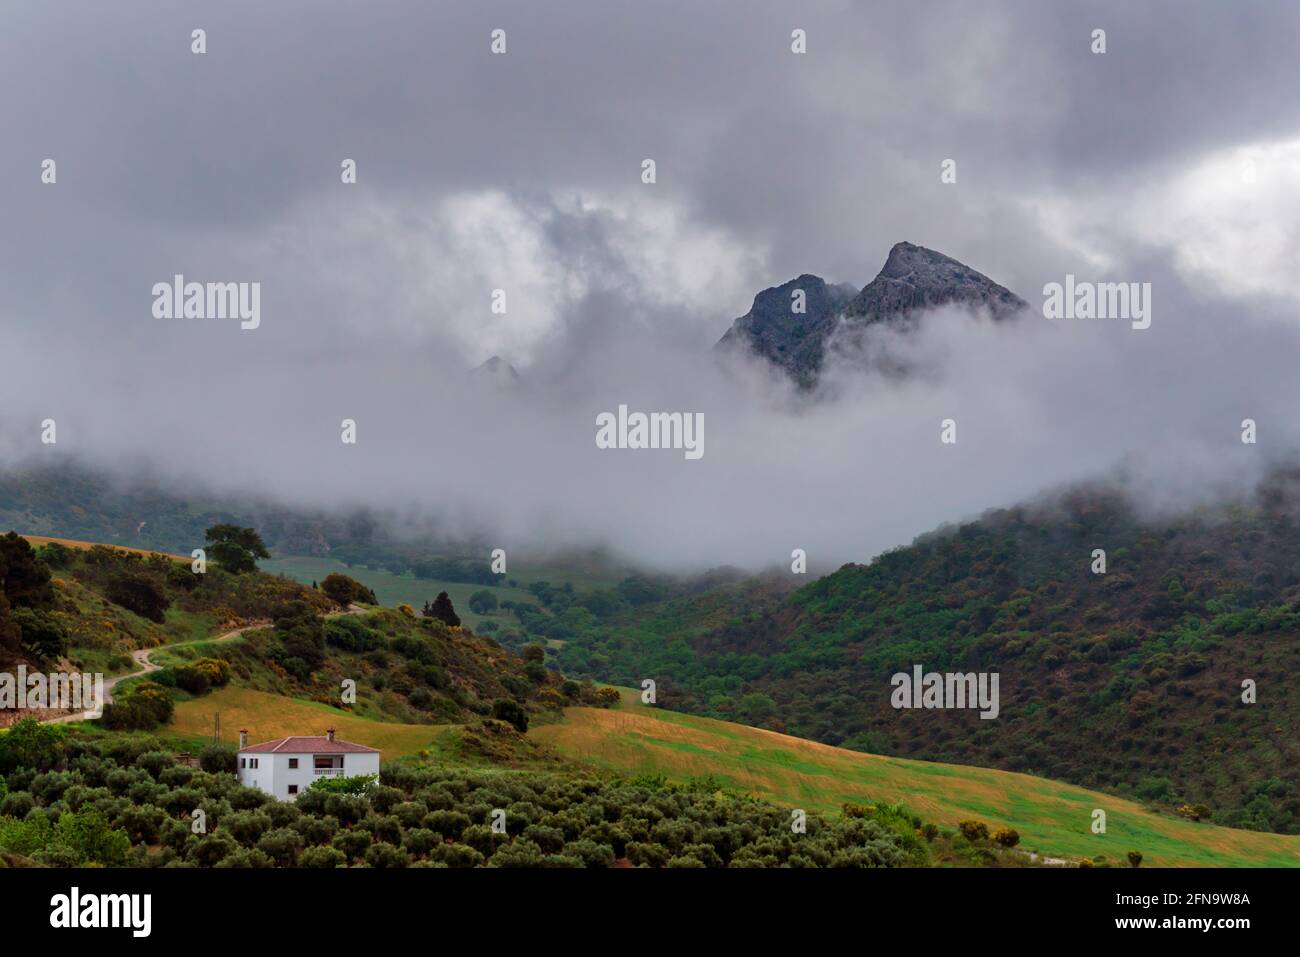 Landscape in Malaga with farmland, a house and the Peña Negra mountain  peeking out from the clouds that border it Stock Photo - Alamy